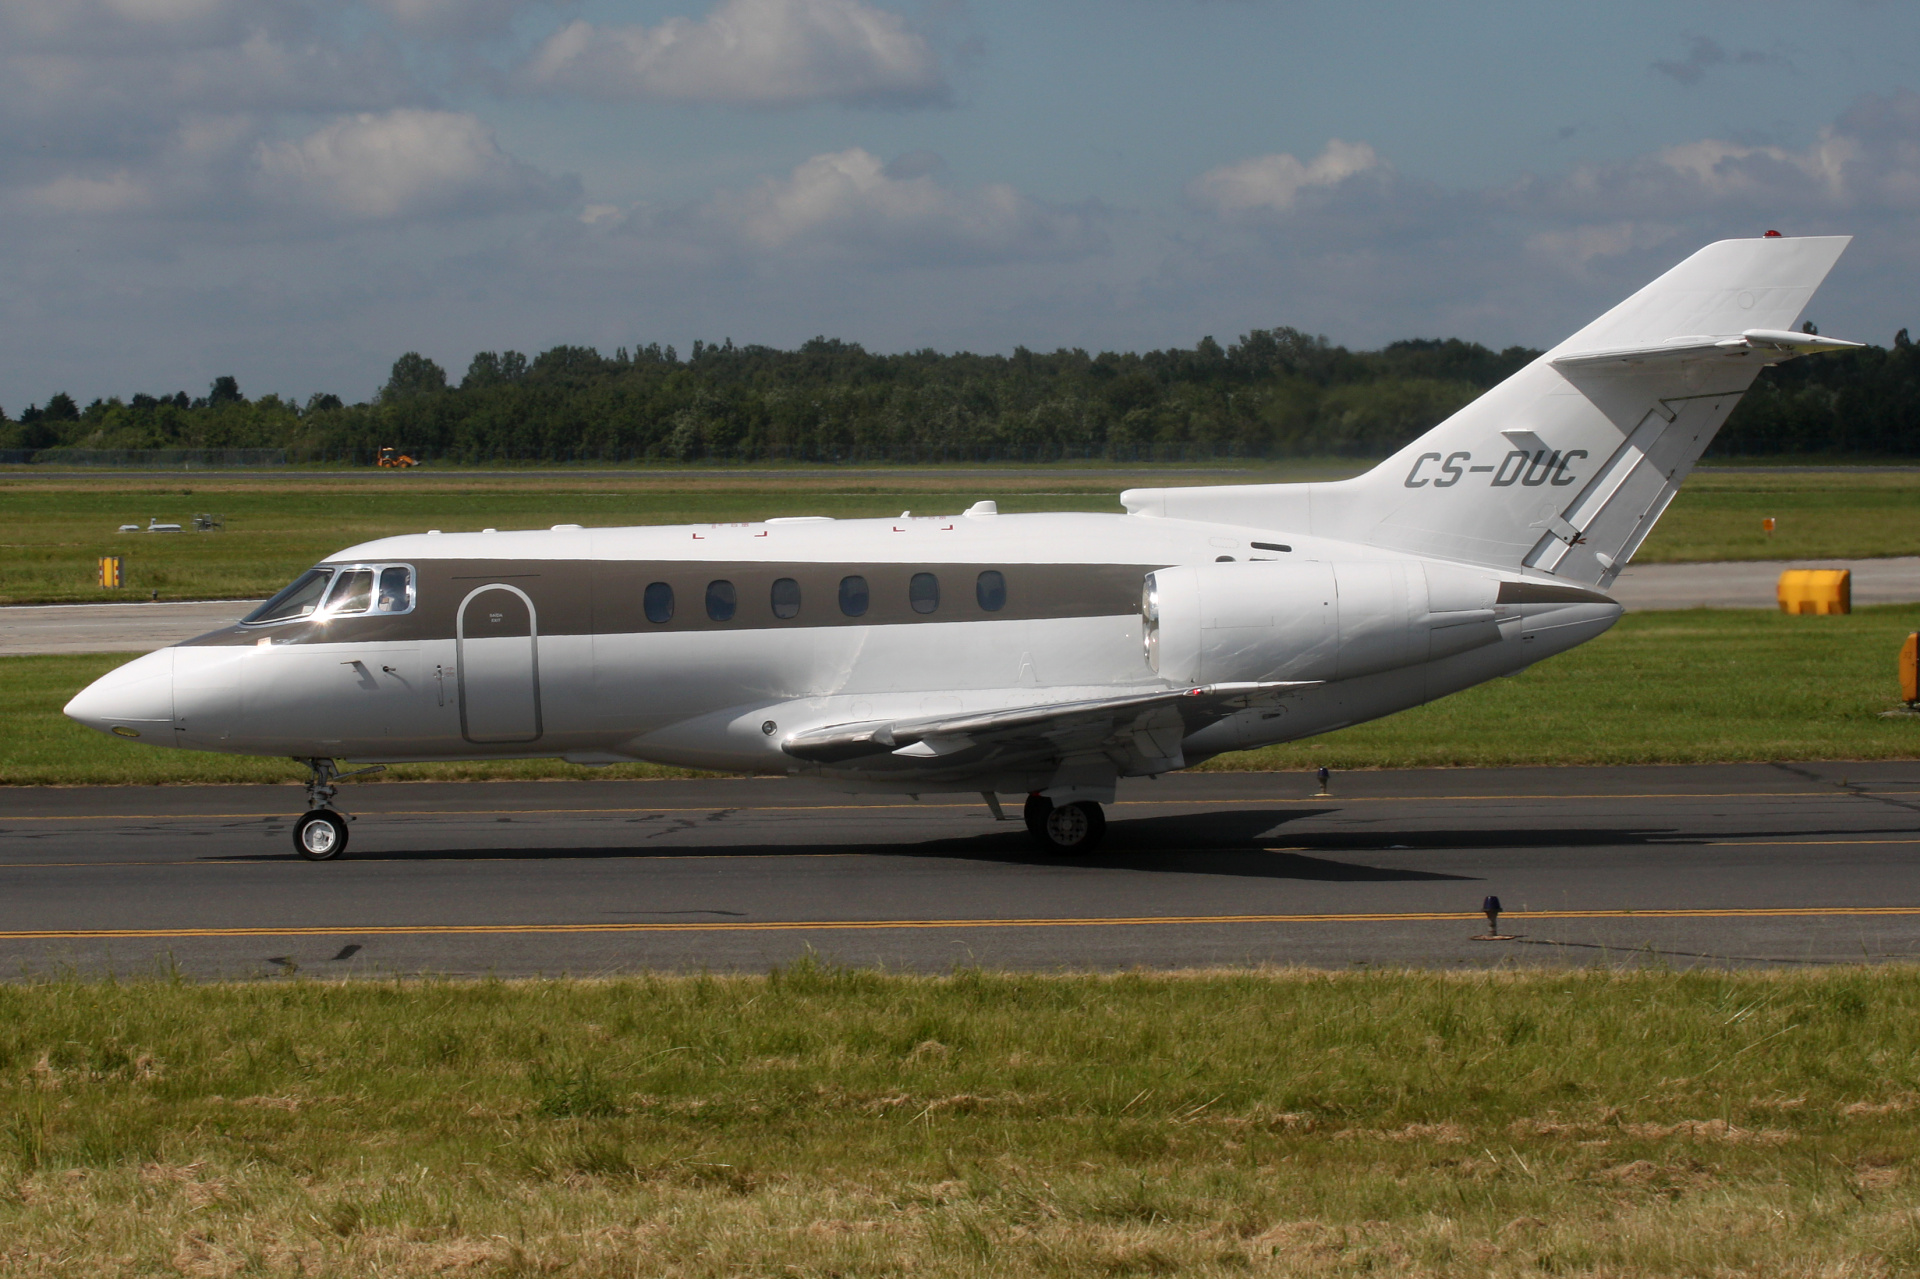 CS-DUC, NetJets Europe (Aircraft » EPWA Spotting » BAe 125 and revisions » Raytheon Hawker 750)